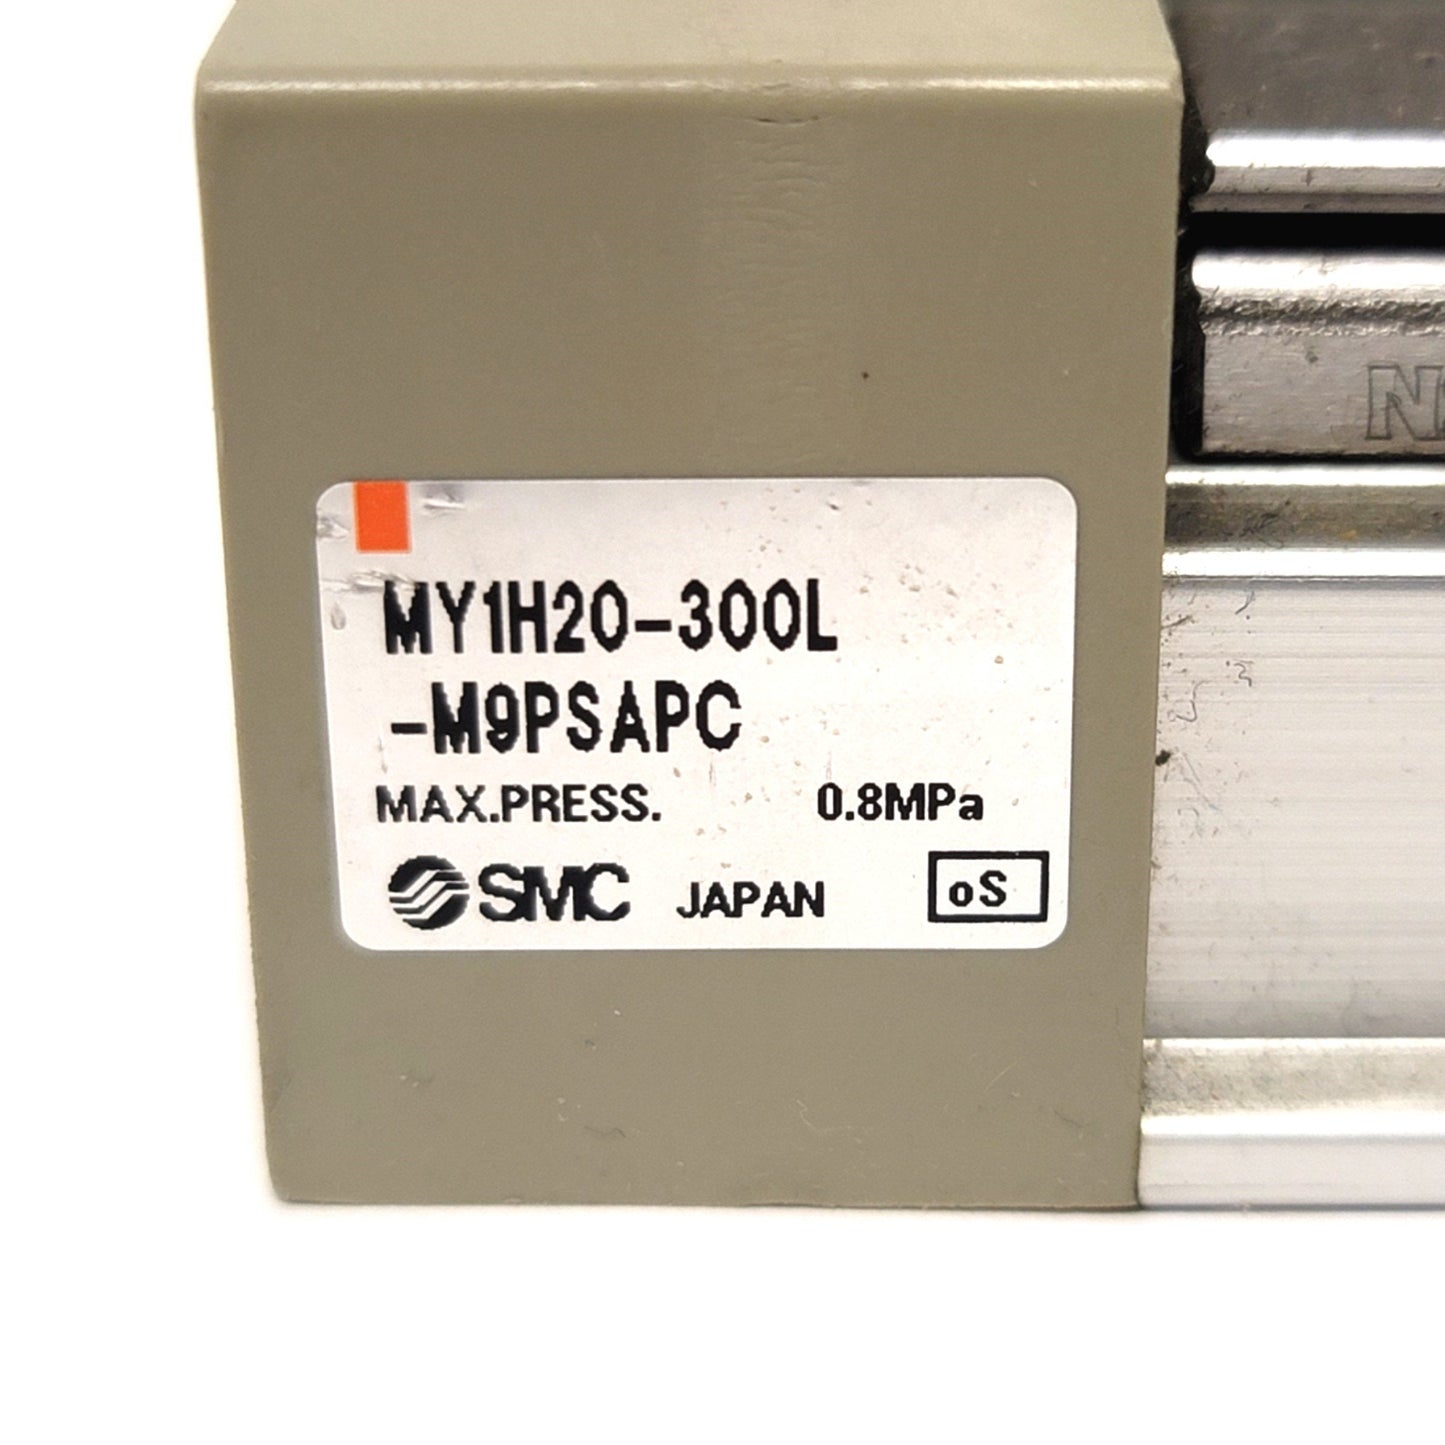 Used SMC MY1H20-300L Pneumatic Linear Actuator 20mm Bore, 300mm Stroke, M5 Ports